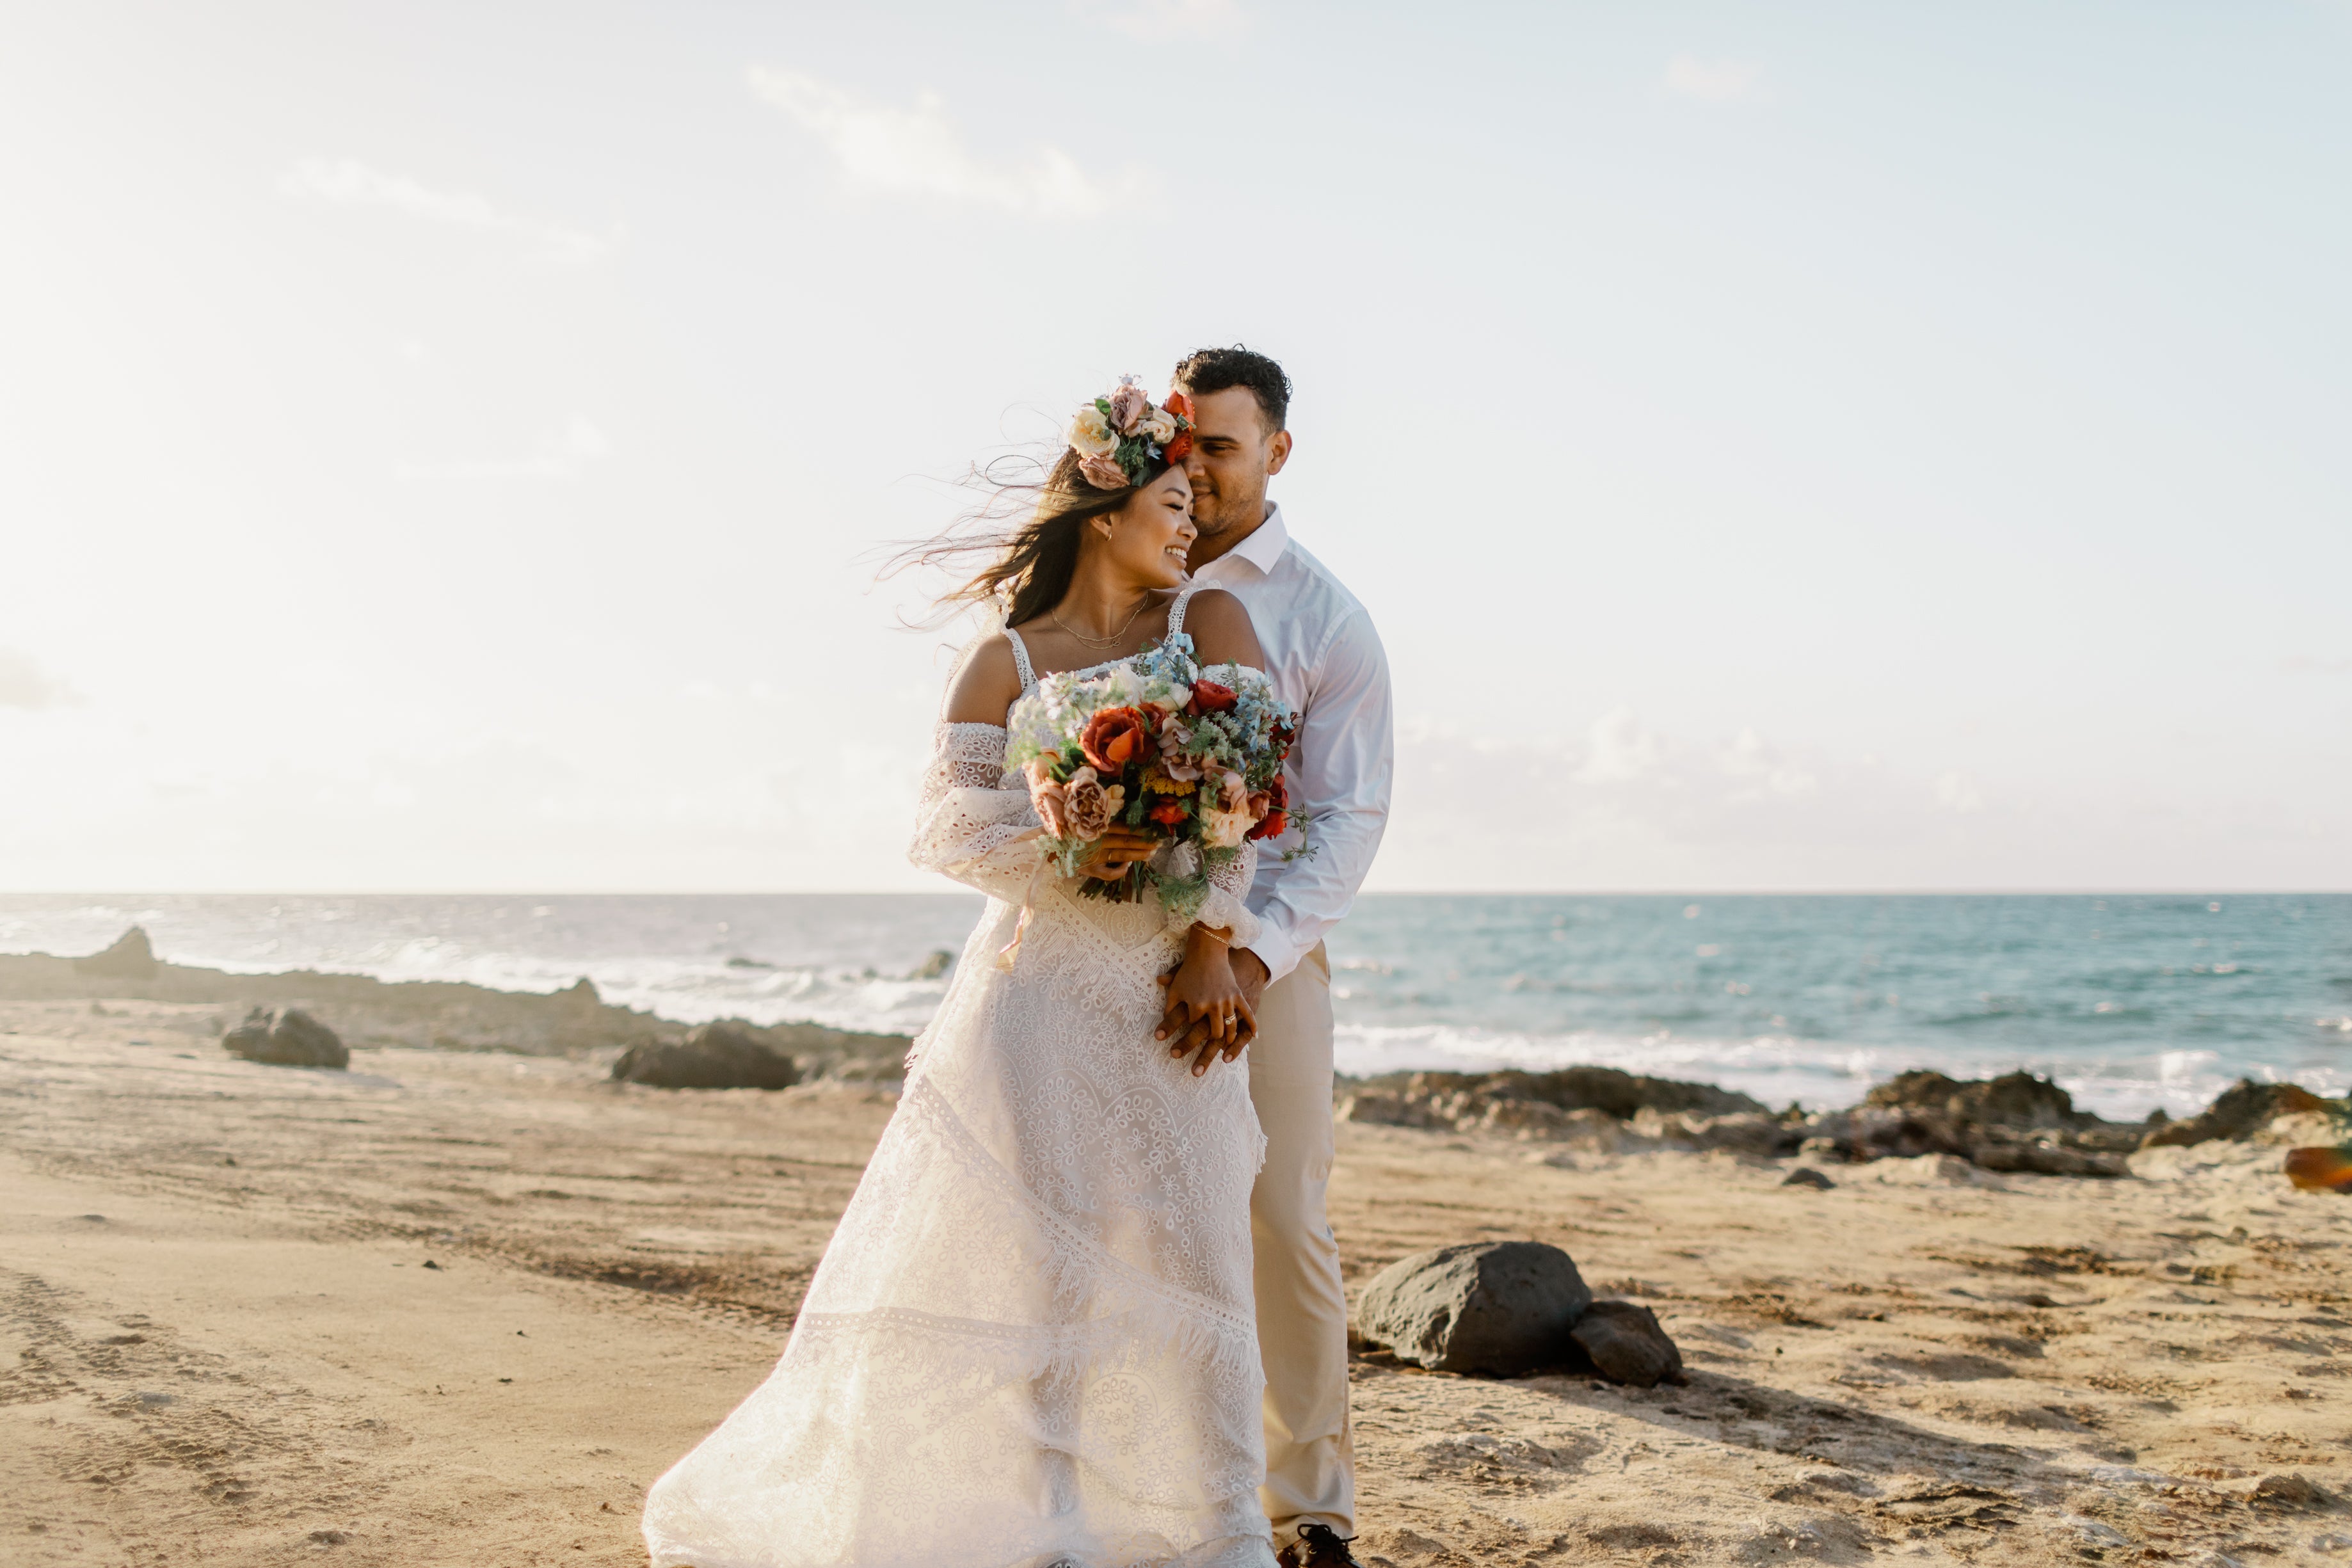 Couple eloping on the beach in Hawaii